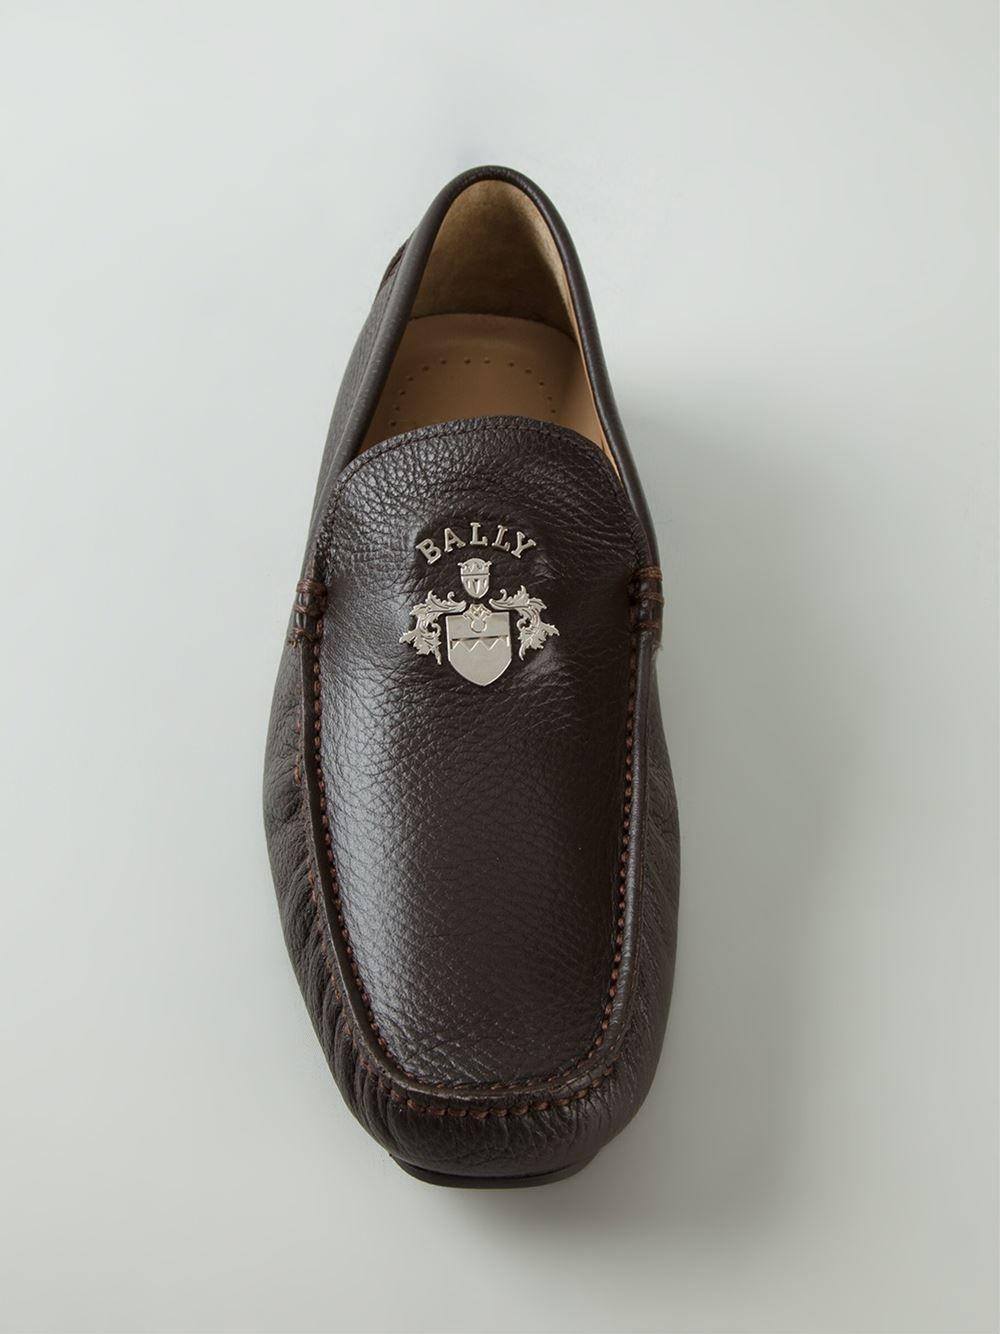 Bally Shoes Logo - Lyst Driving Shoes in Brown